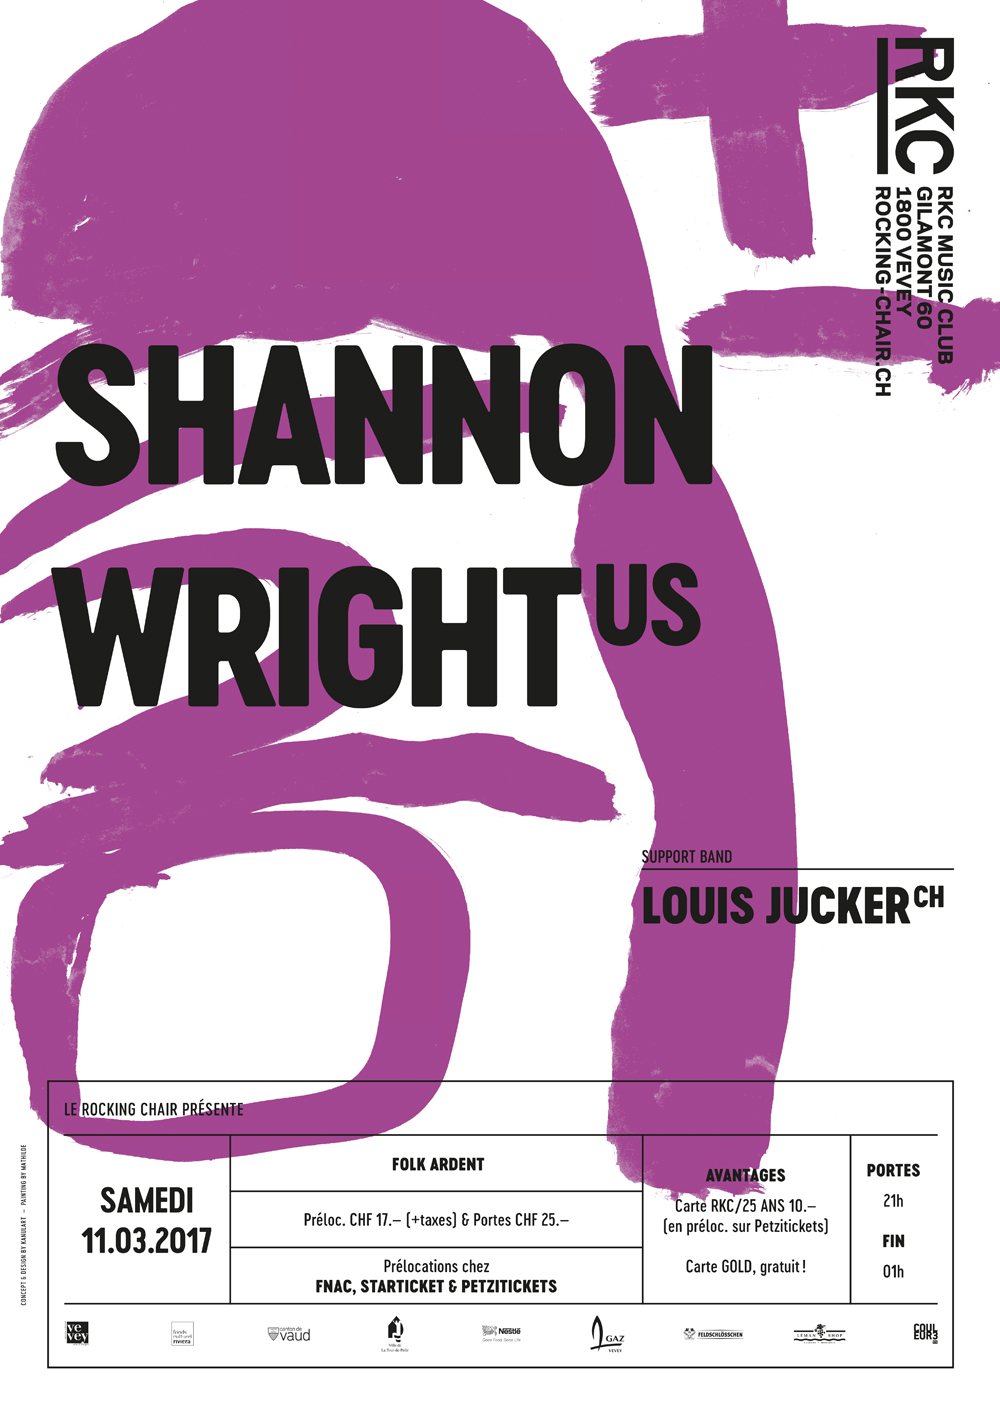 SHANNON WRIGHT (US) + LOUIS JUCKER (CH) - Rocking Chair Vevey